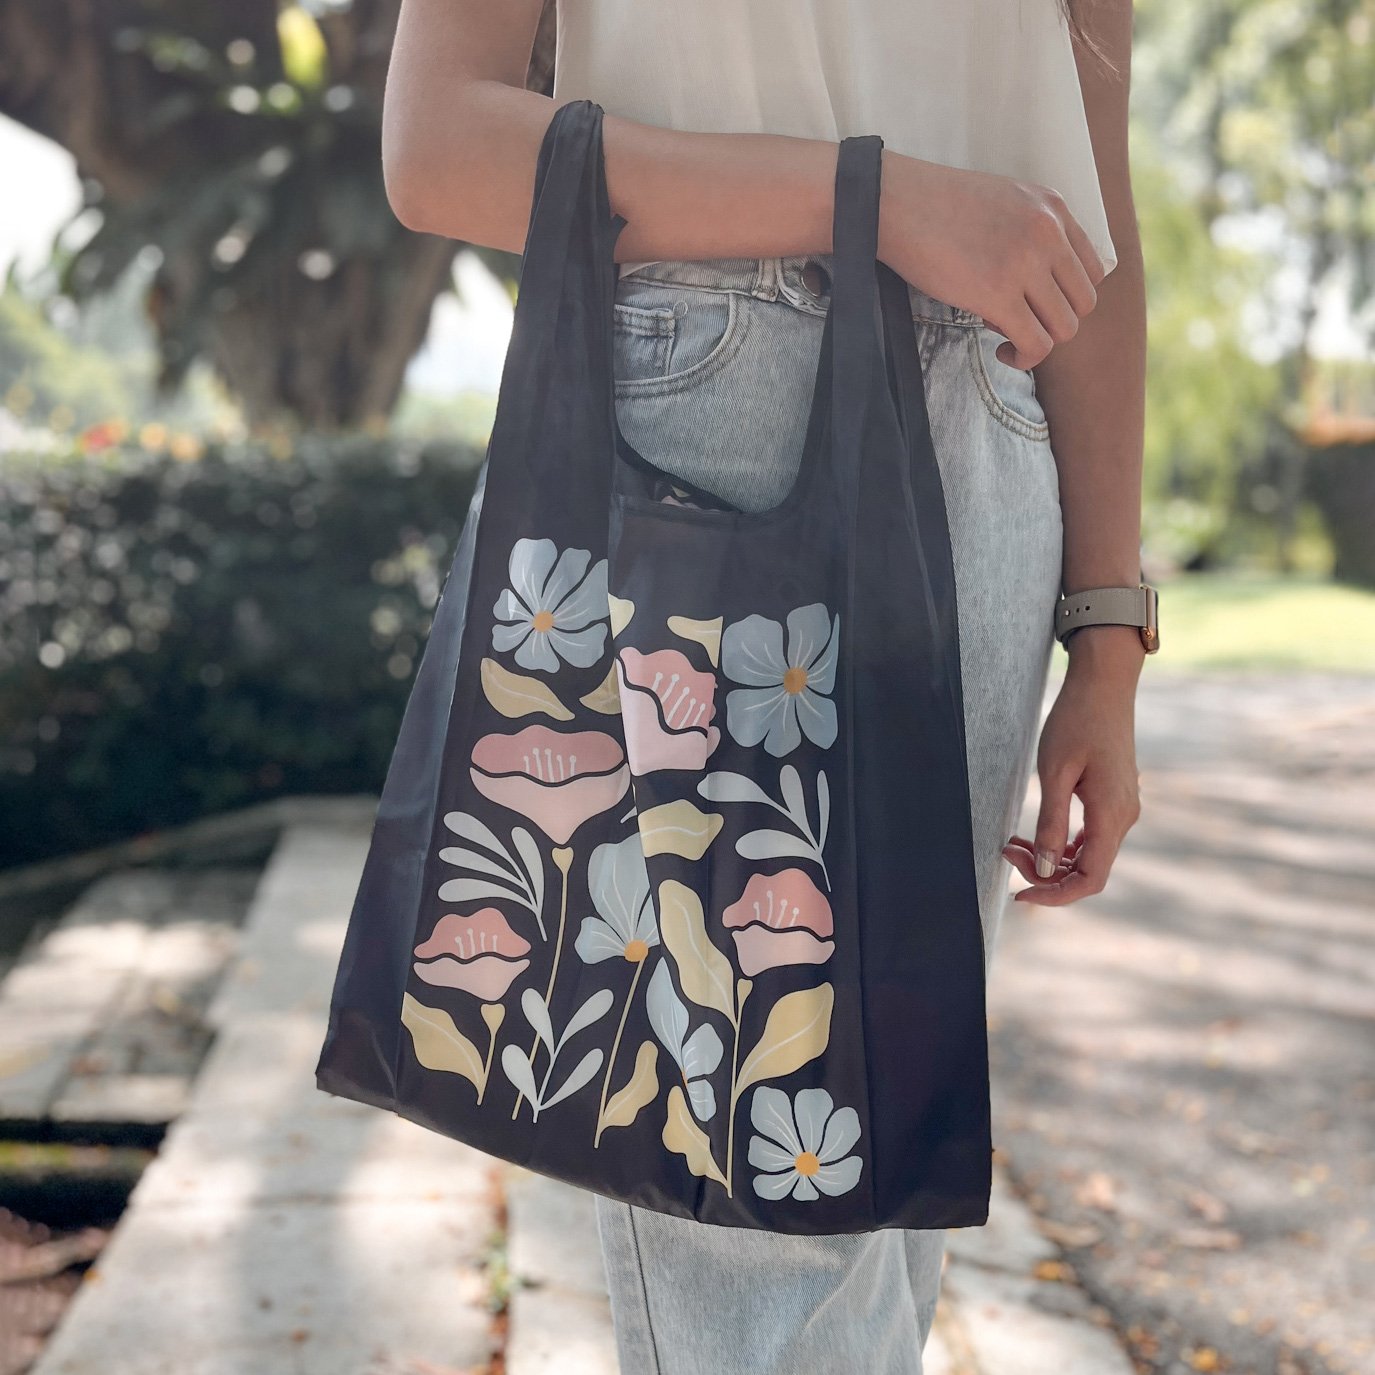 Groovy Florals | Reusable Shopping Bag